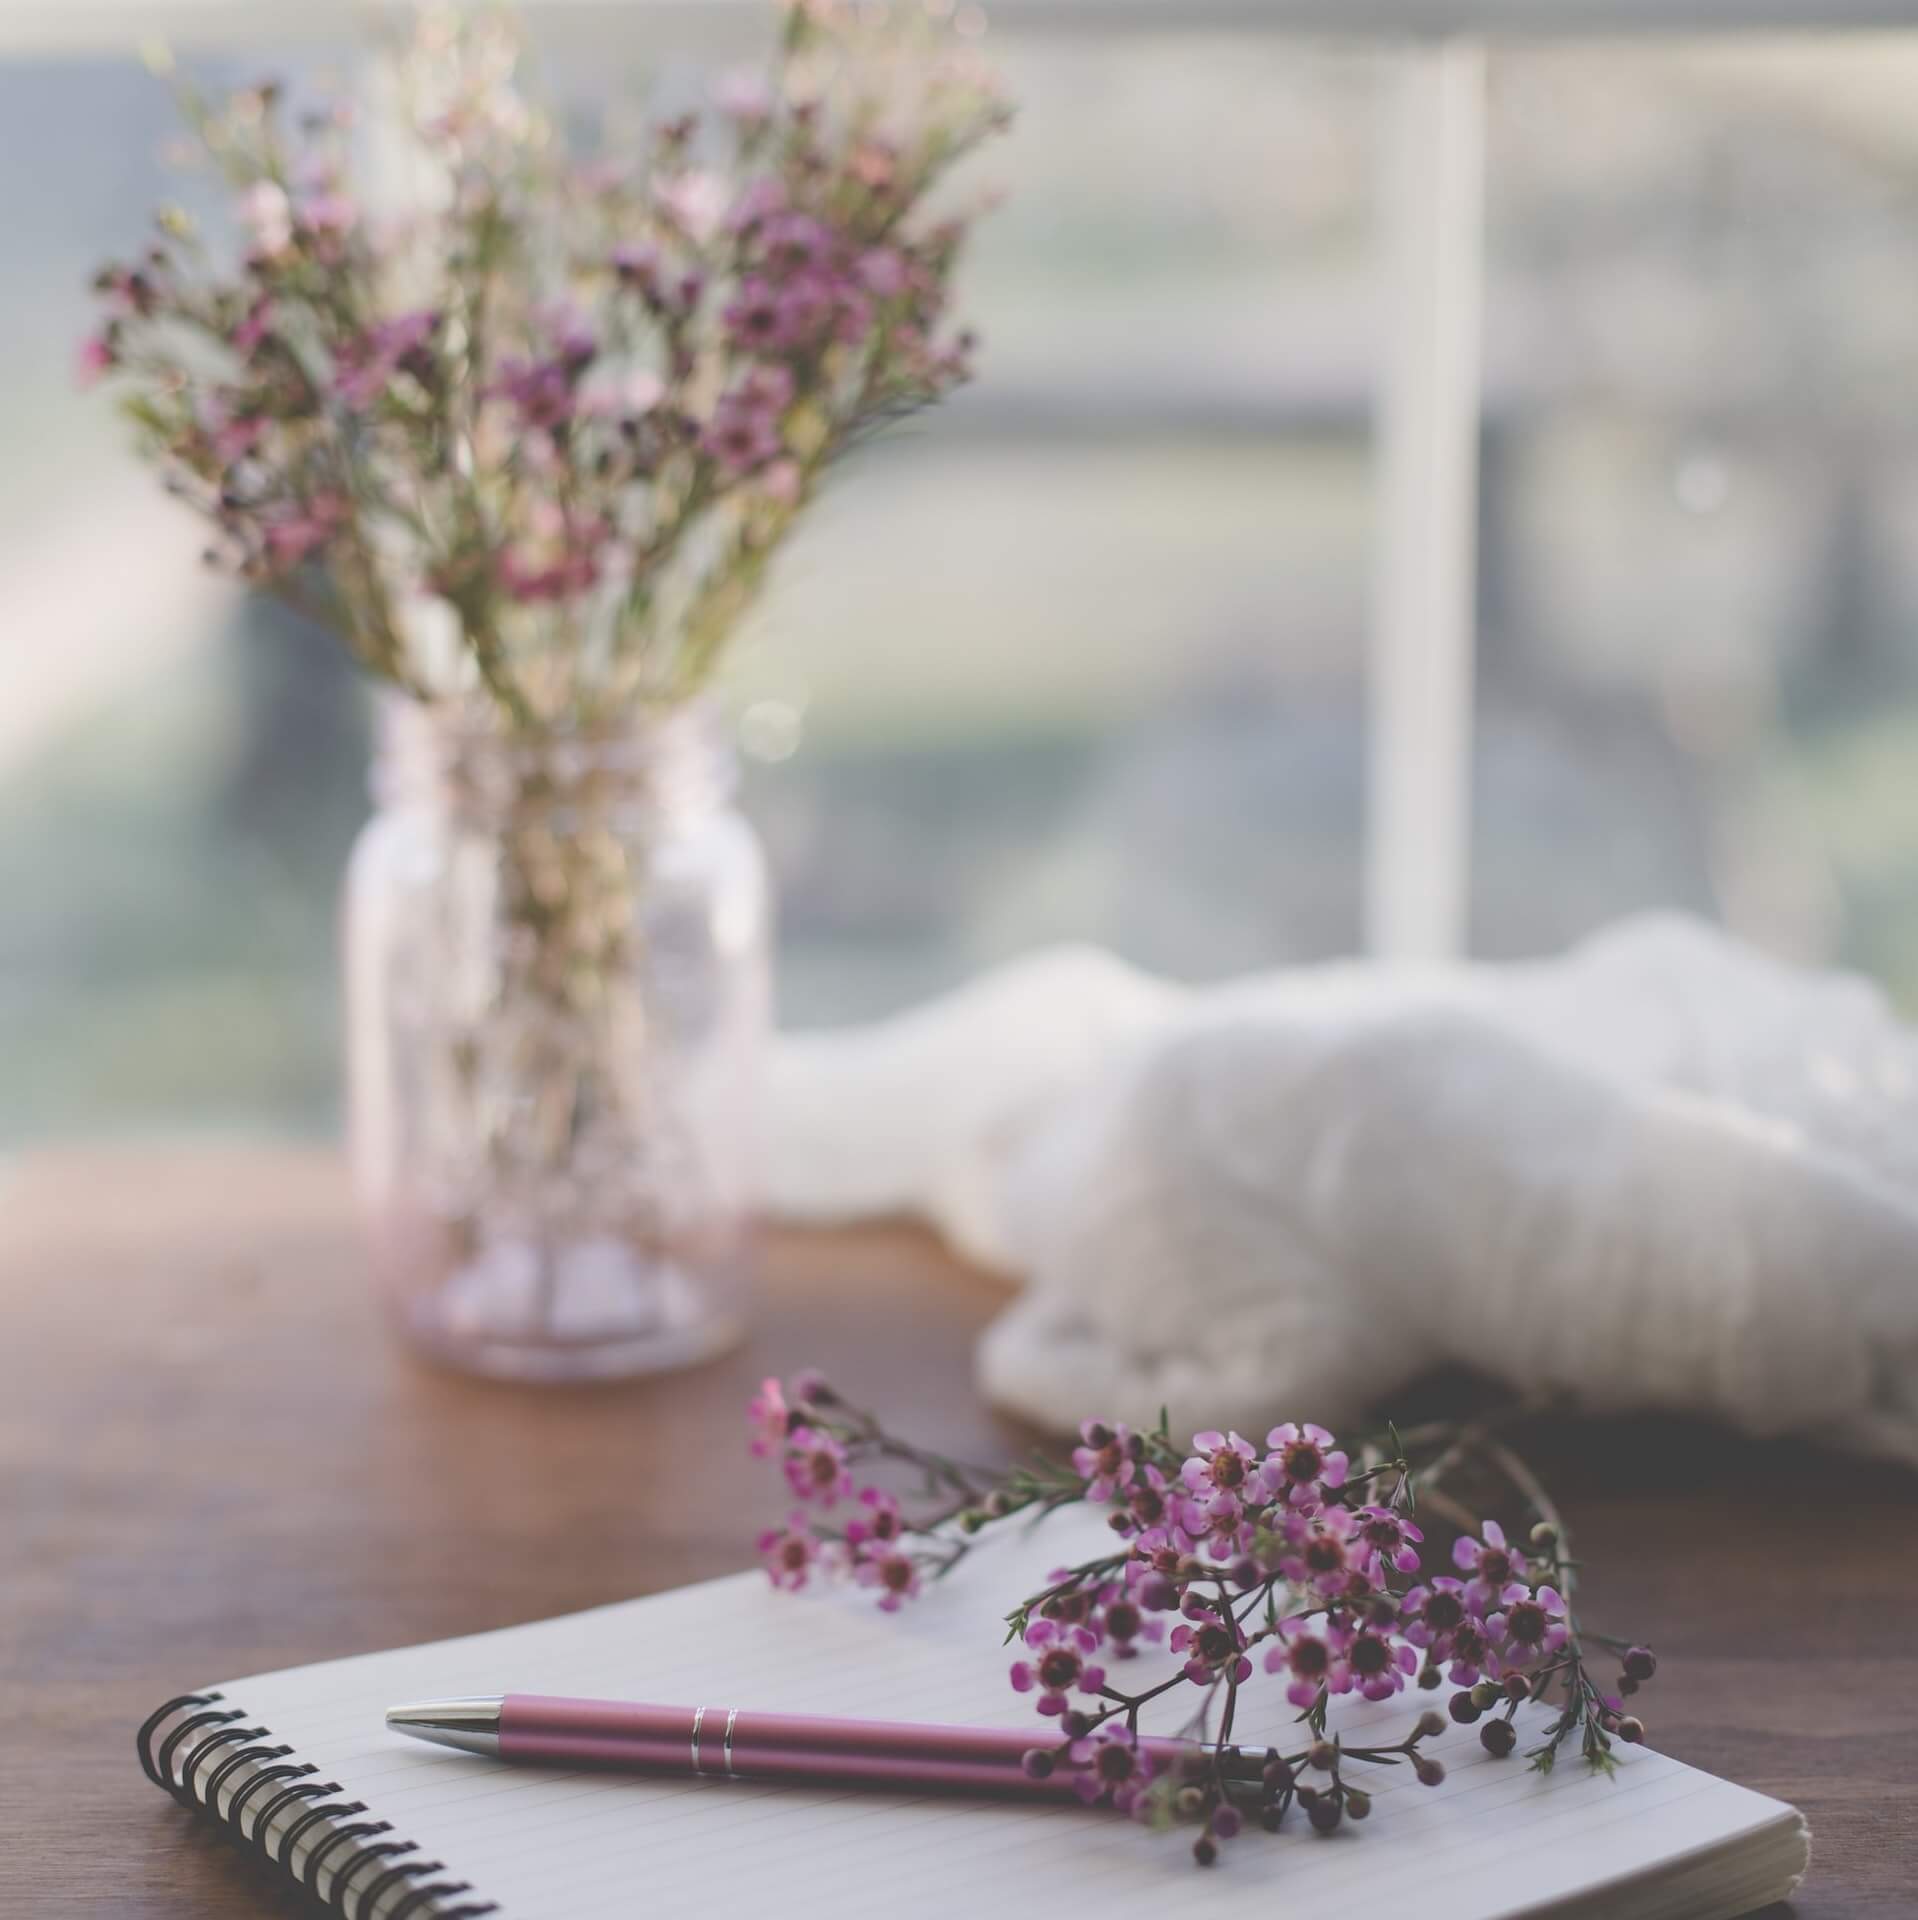 The gratitude connection - notebook with pen and flowers